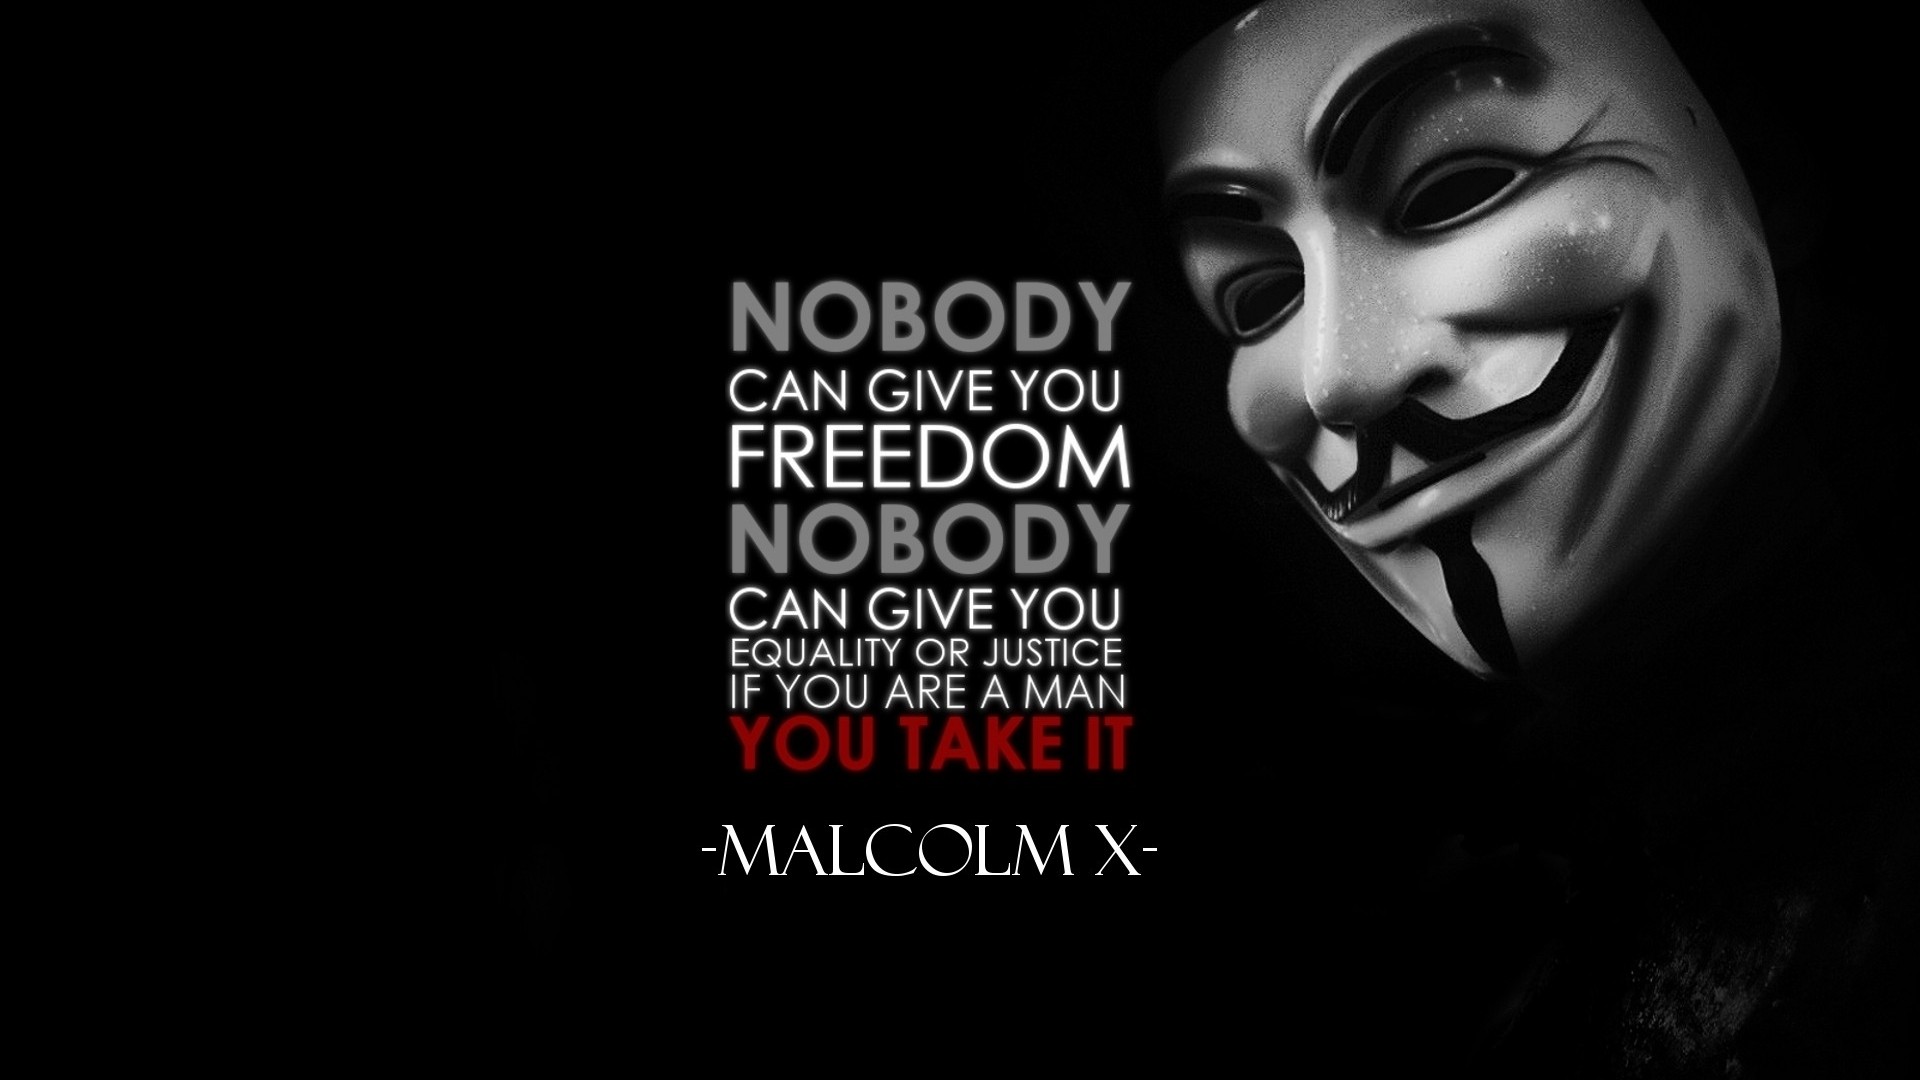 General 1920x1080 Anonymous (hacker group) Guy Fawkes mask V for Vendetta mask quote simple background black background